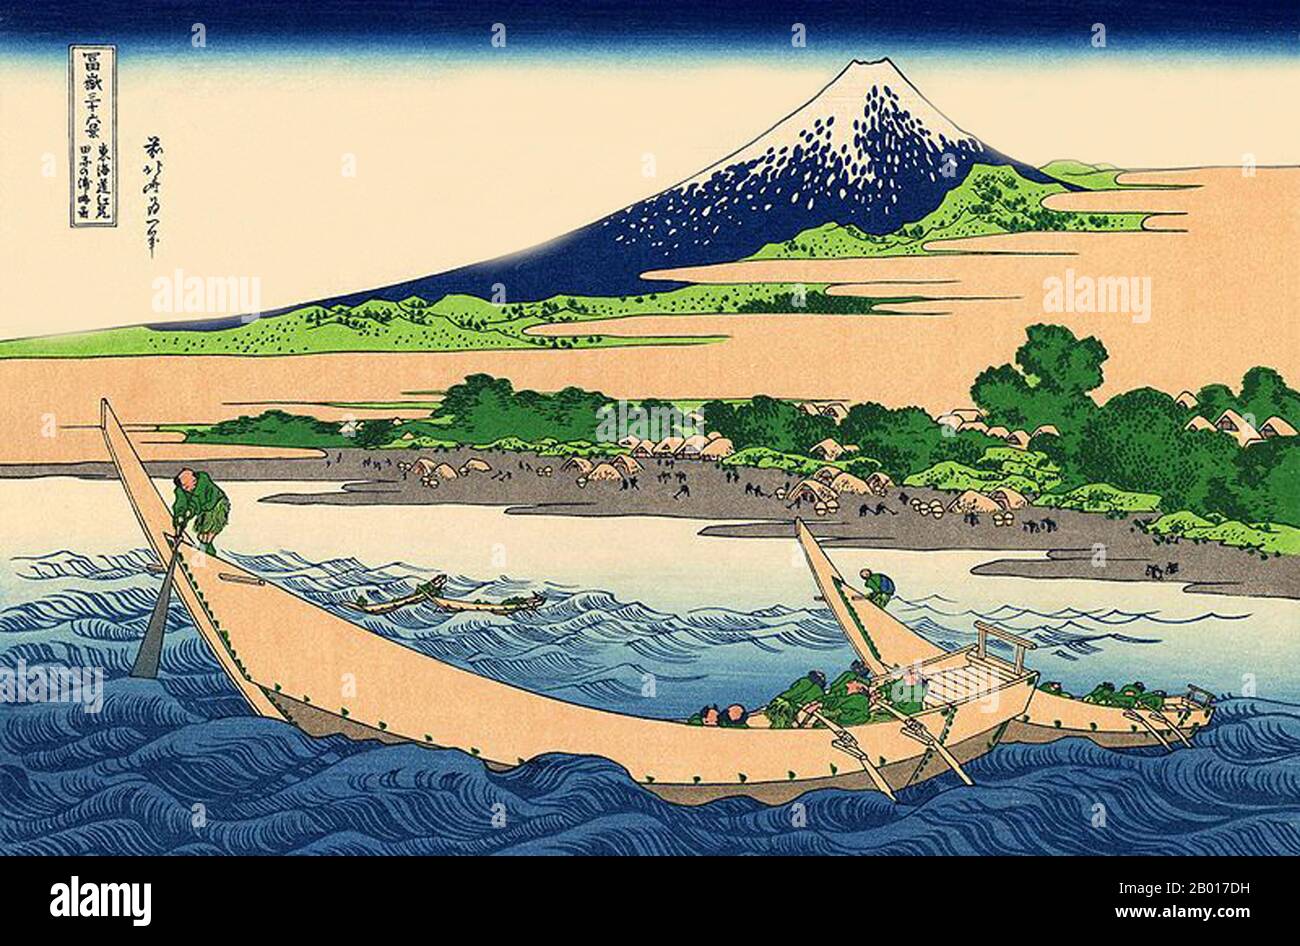 Japan: 'Tago Bay near Ejiri on the Tokaido'. Ukiyo-e woodblock print from the series ‘Thirty-Six Views of Mount Fuji’ by Katsushika Hokusai (31 October 1760 - 10 May 1849), 1830.  ‘Thirty-six Views of Mount Fuji’ is an ‘ukiyo-e’ series of woodcut prints by Japanese artist Katsushika Hokusai. The series depicts Mount Fuji in differing seasons and weather conditions from a variety of places and distances. It actually consists of 46 prints created between 1826 and 1833. The first 36 were included in the original publication and, due to their popularity, 10 more were added. Stock Photo